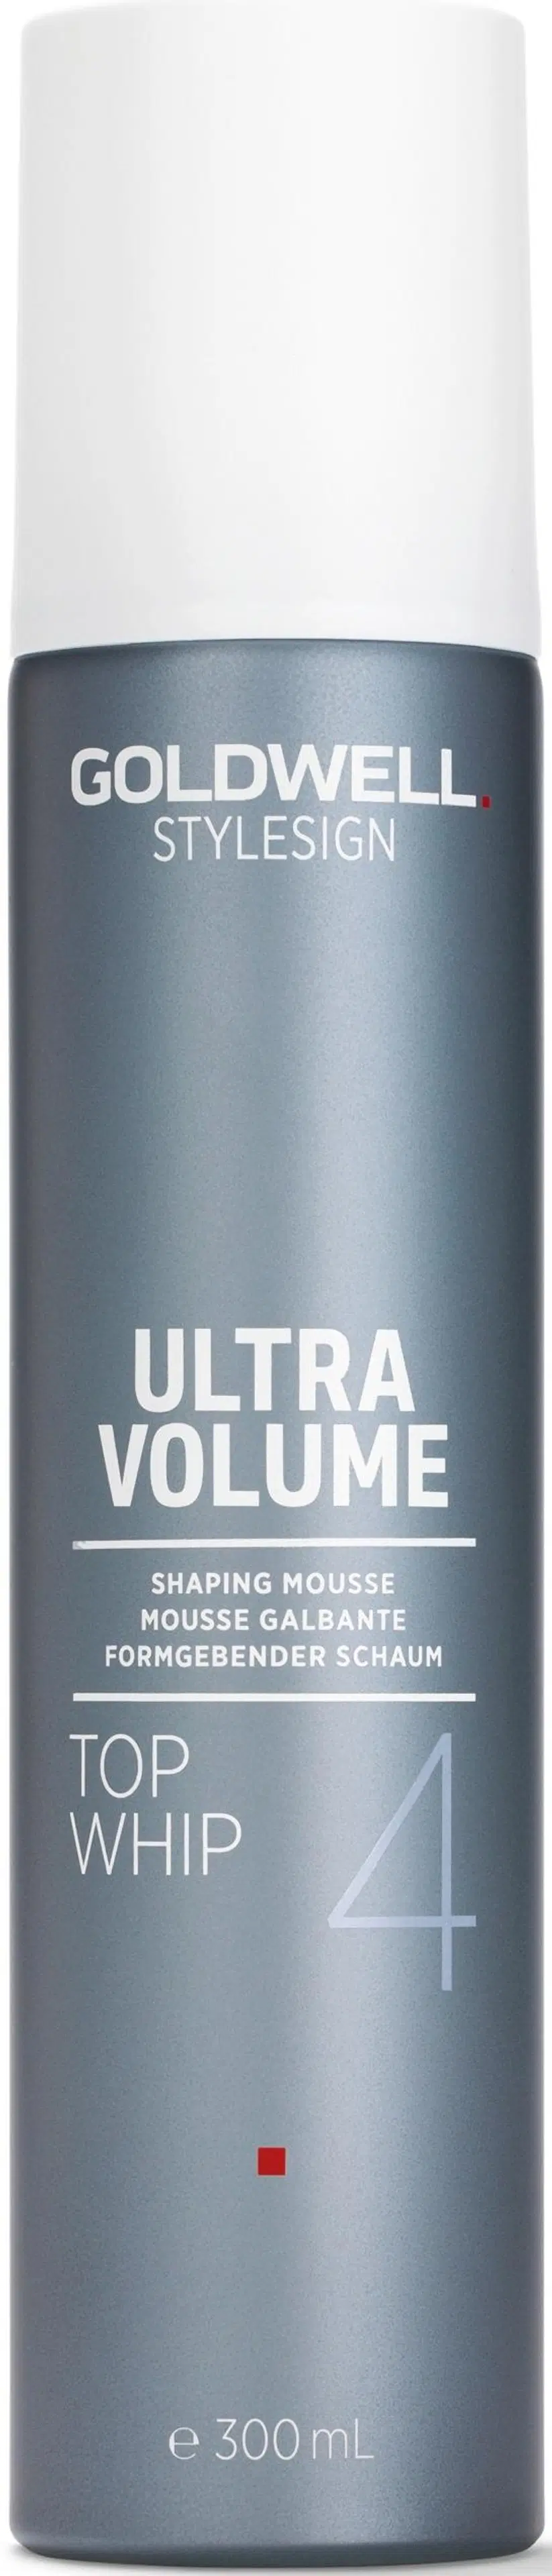 Goldwell StyleSign Ultra Volume Top Whip 4 Shaping mousse muotovaahto 300 ml